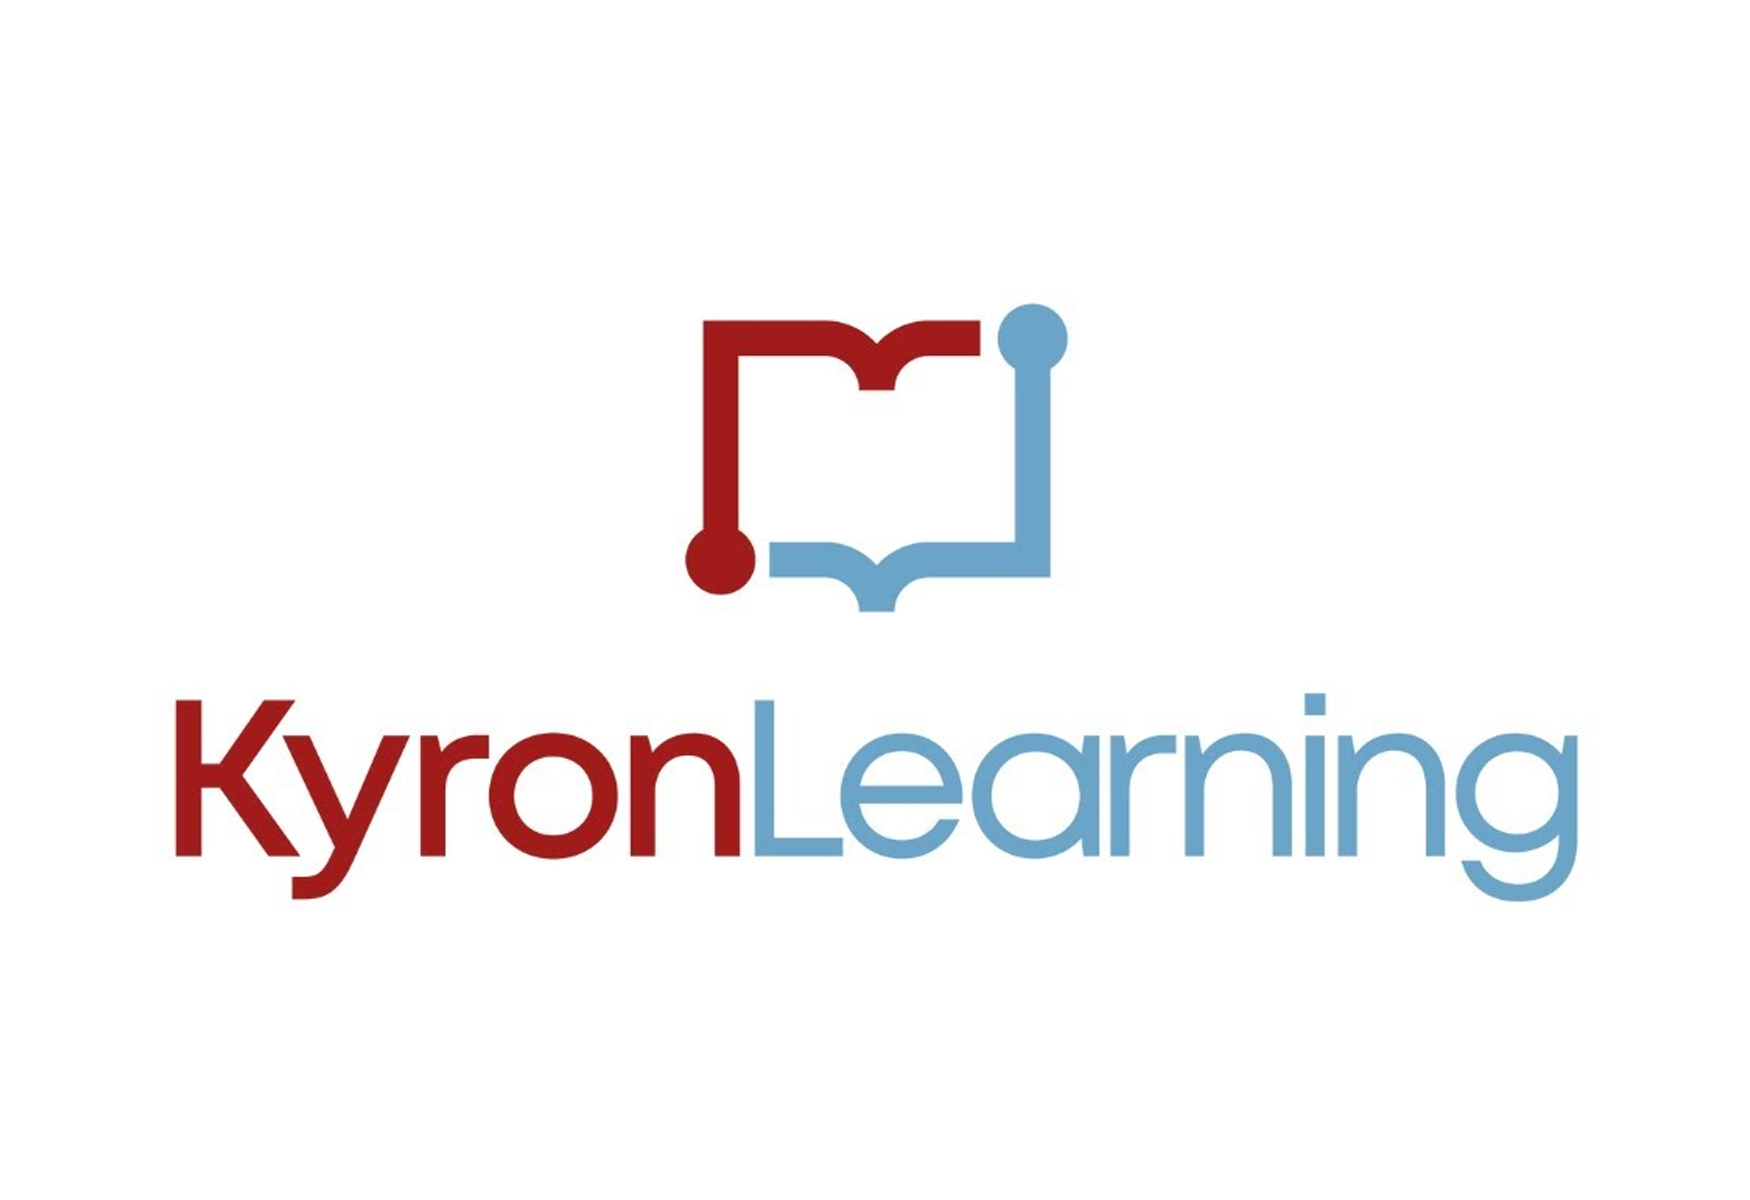 Kyron Learning Secures $14.6 Million To Expand Its Conversational AI Technology